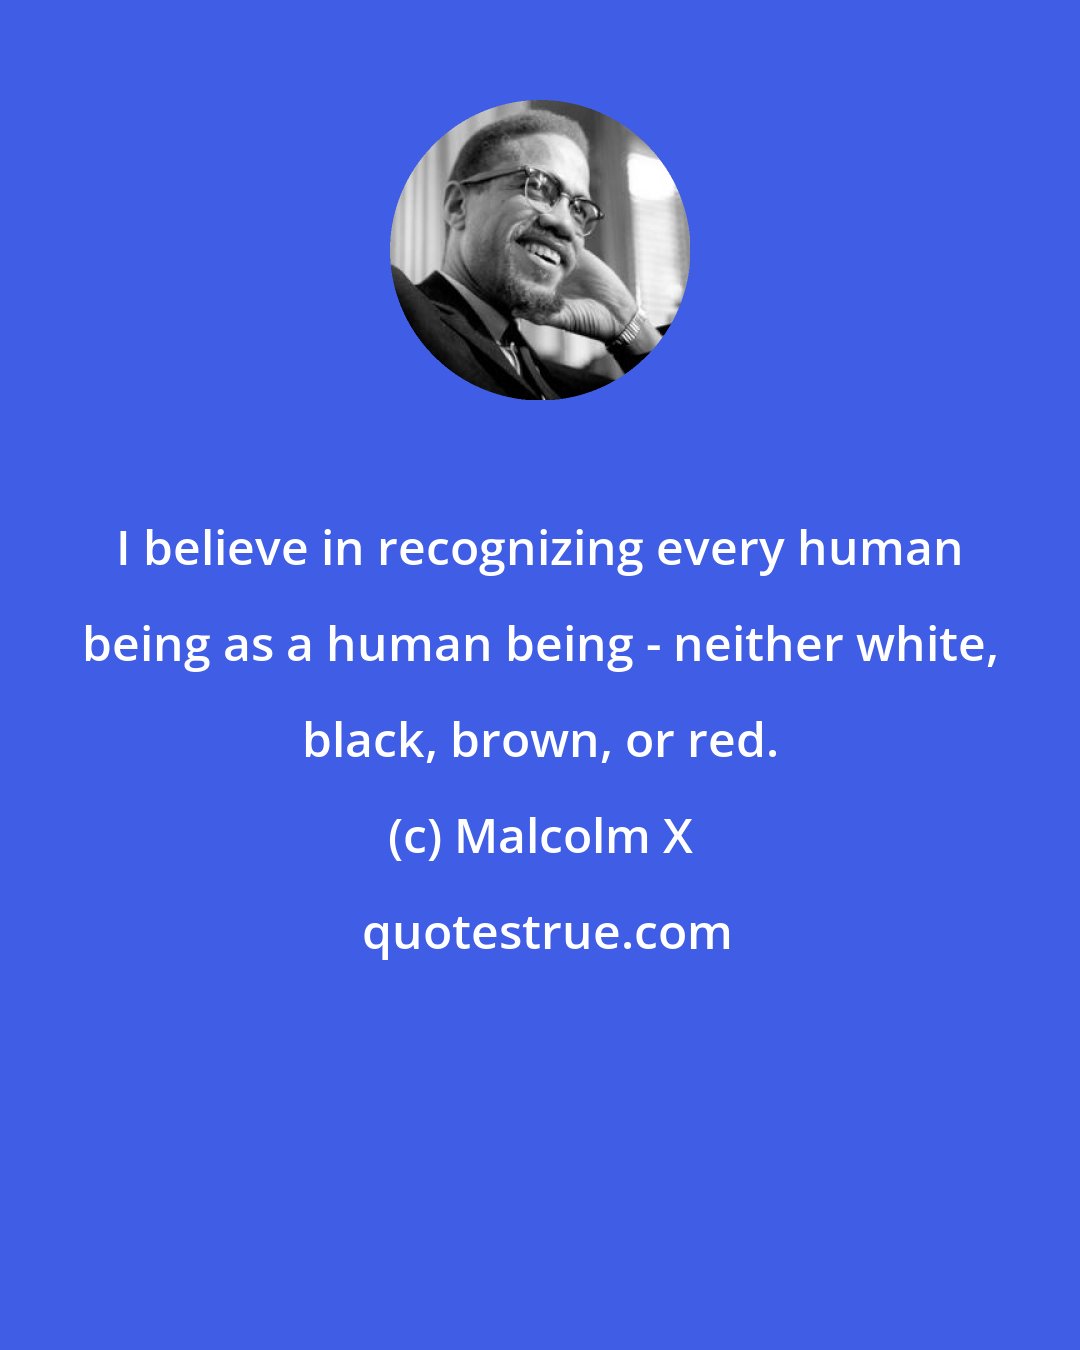 Malcolm X: I believe in recognizing every human being as a human being - neither white, black, brown, or red.